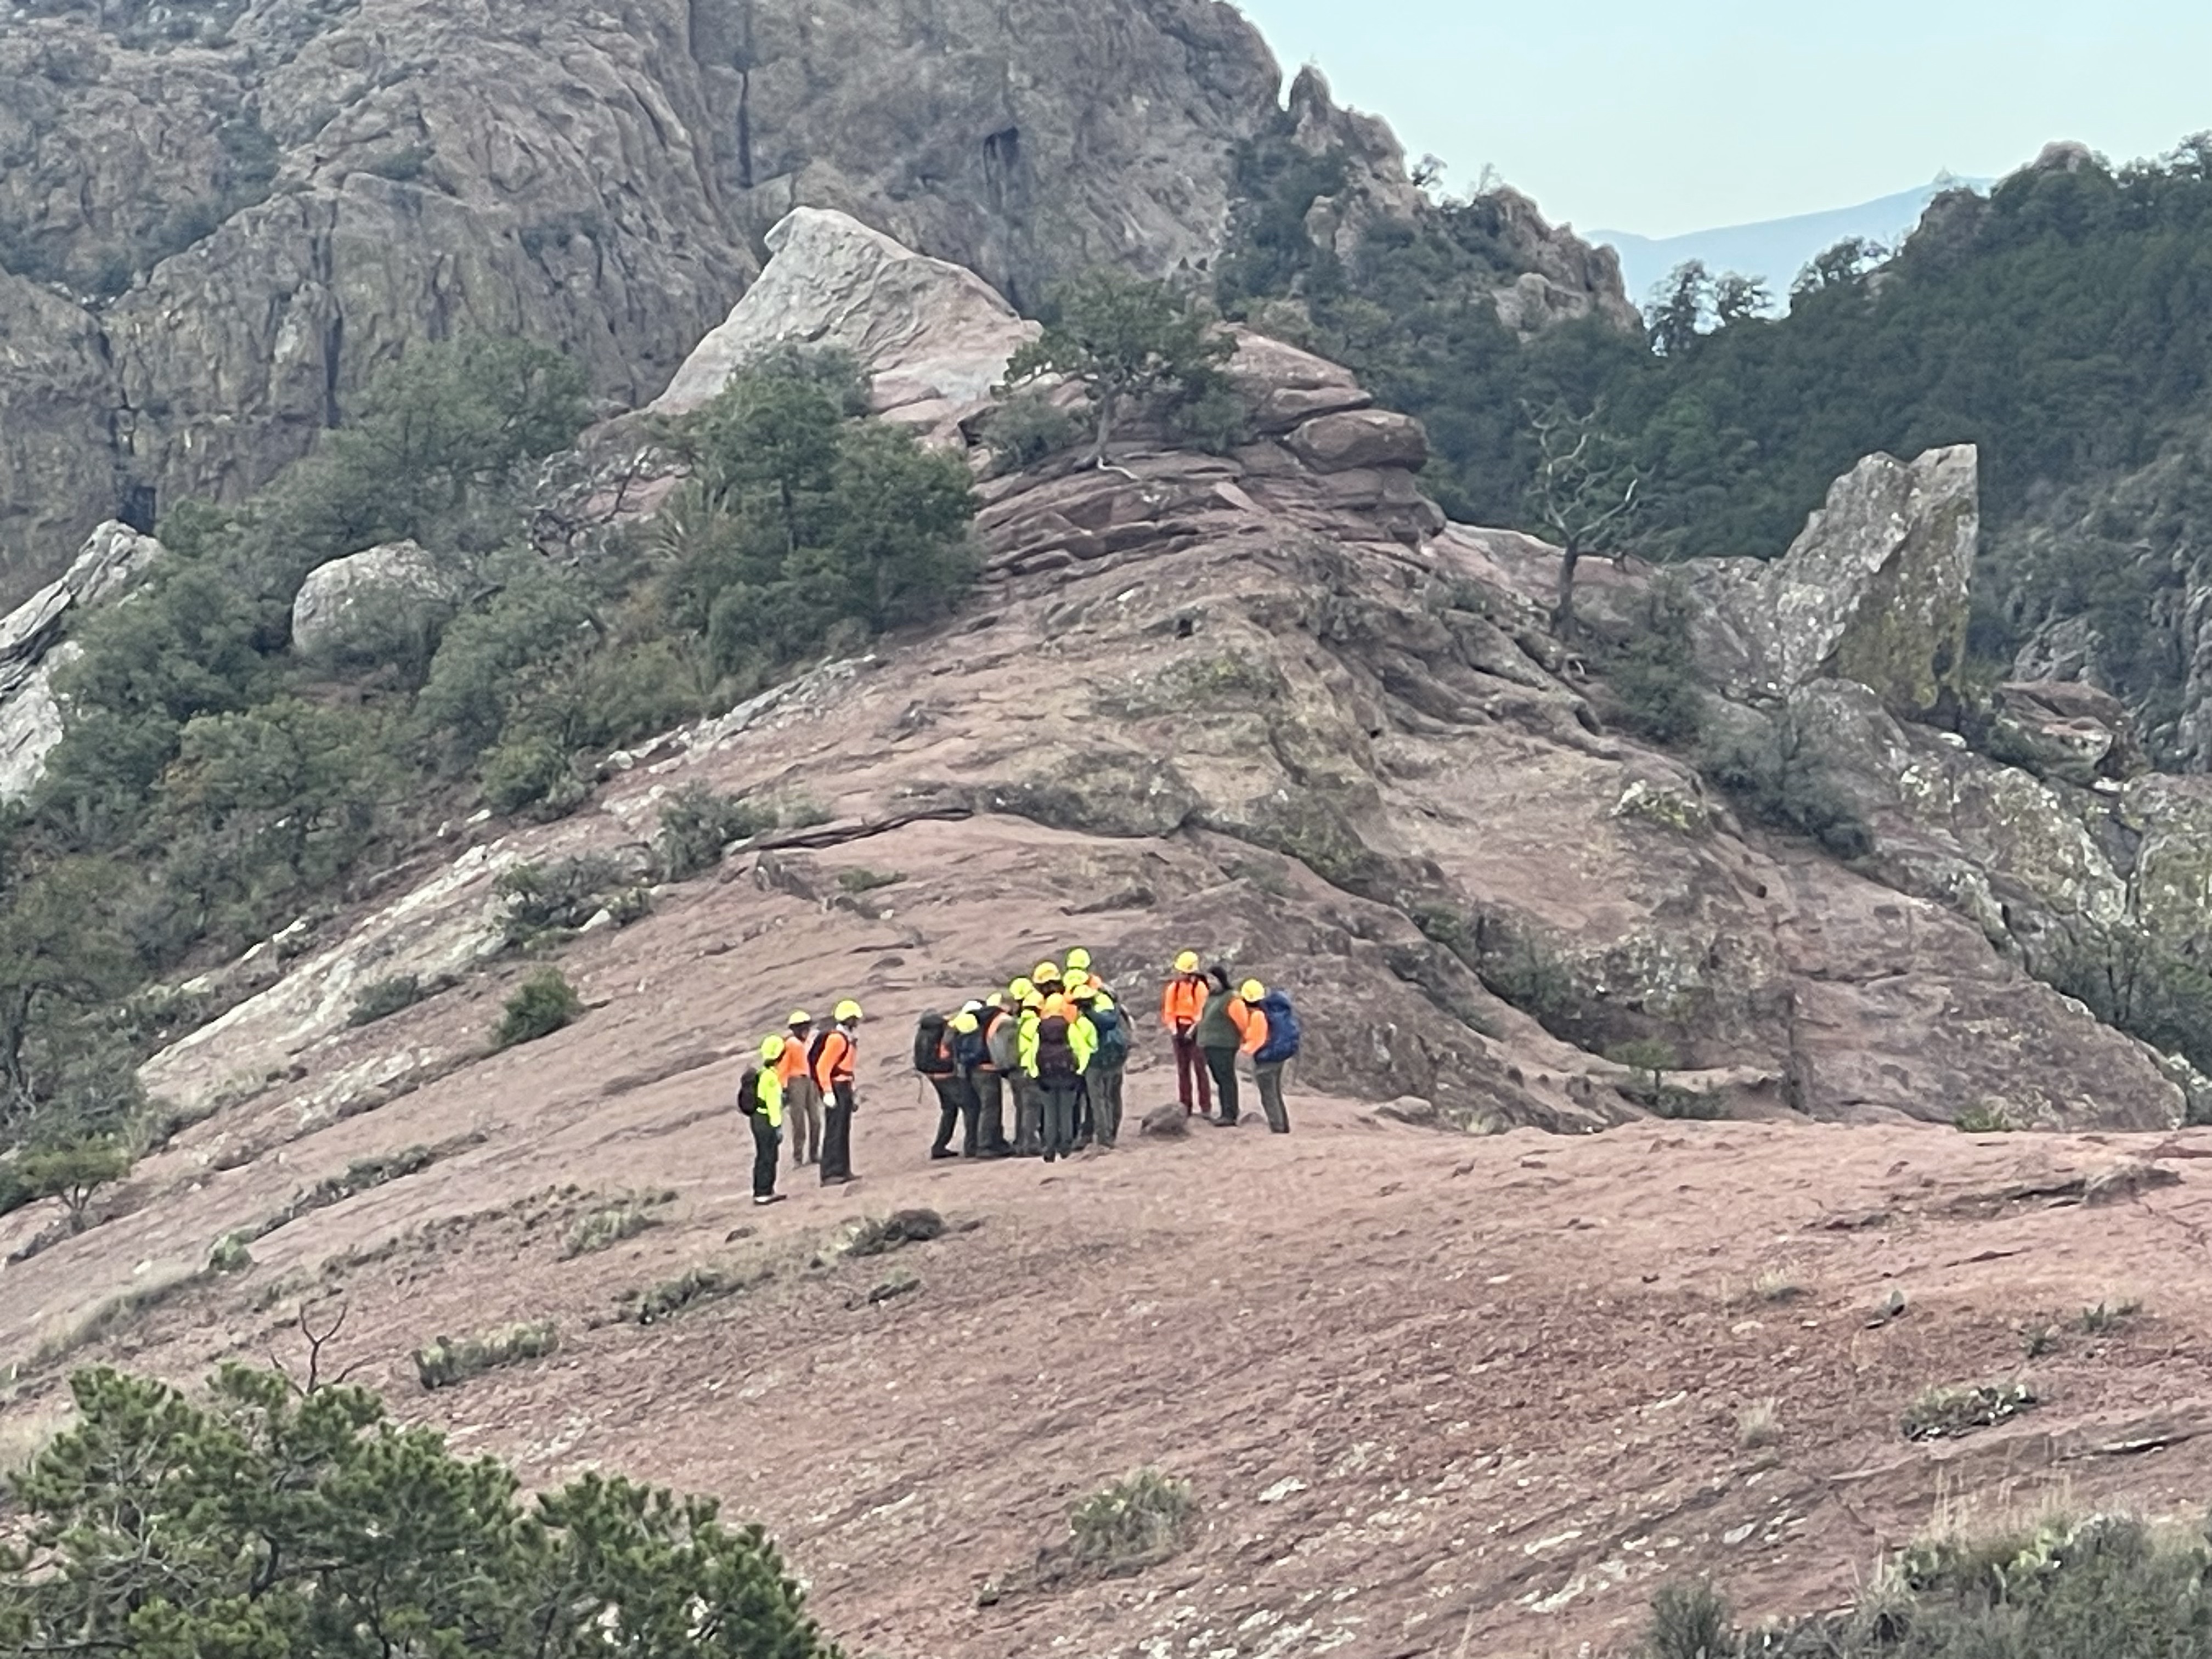 Rescuers transporting missing hiker near the summit of the Lost Mine Trail